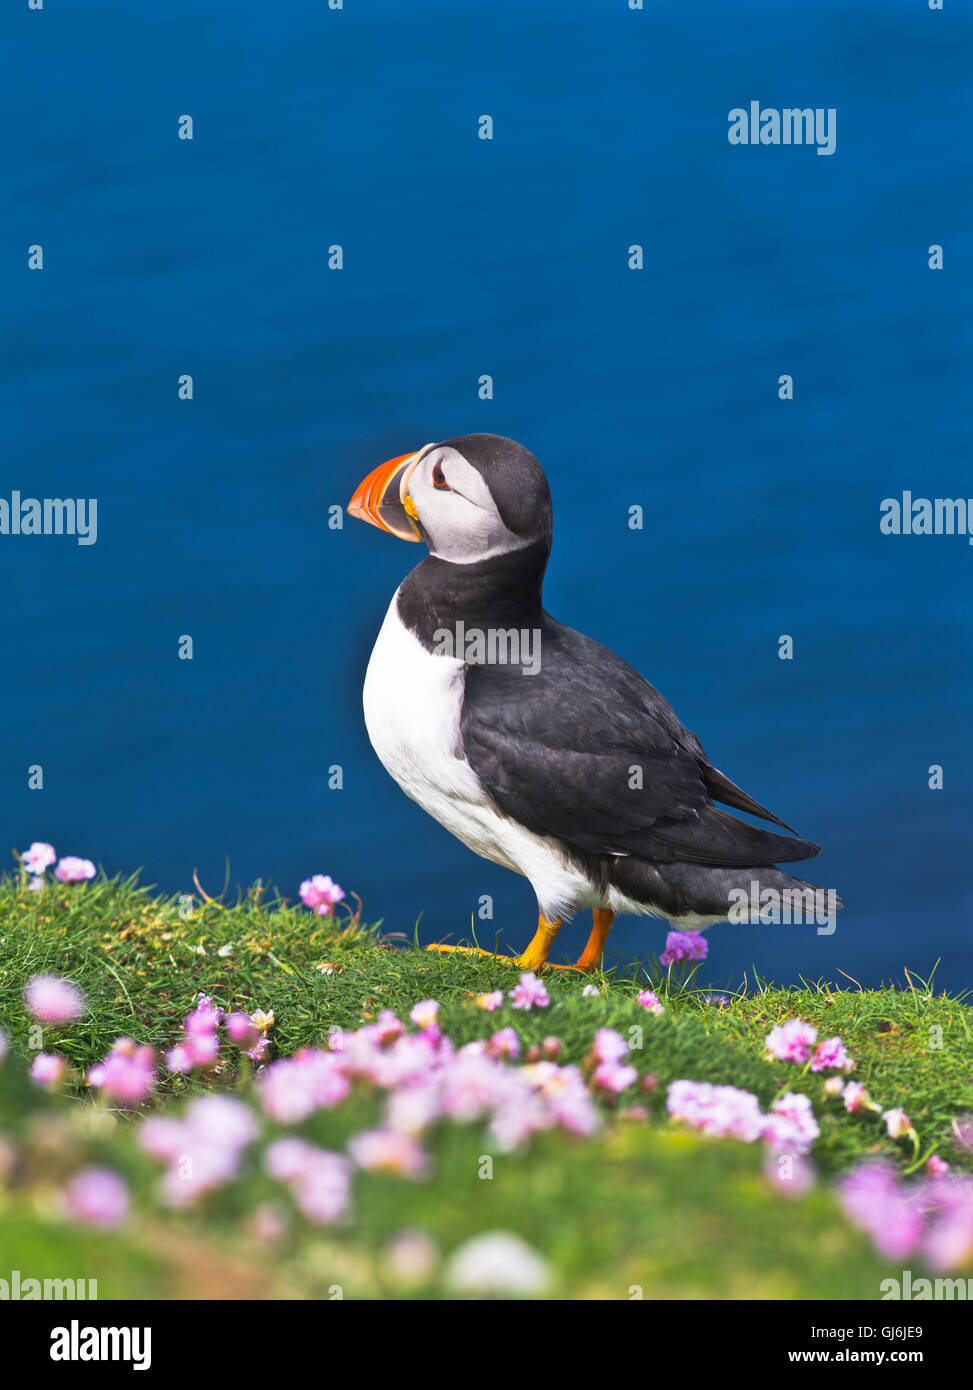 dh Bu Ness FAIR ISLE SHETLAND Puffin on thrift cliff top wild parrot scotland puffins Stock Photo